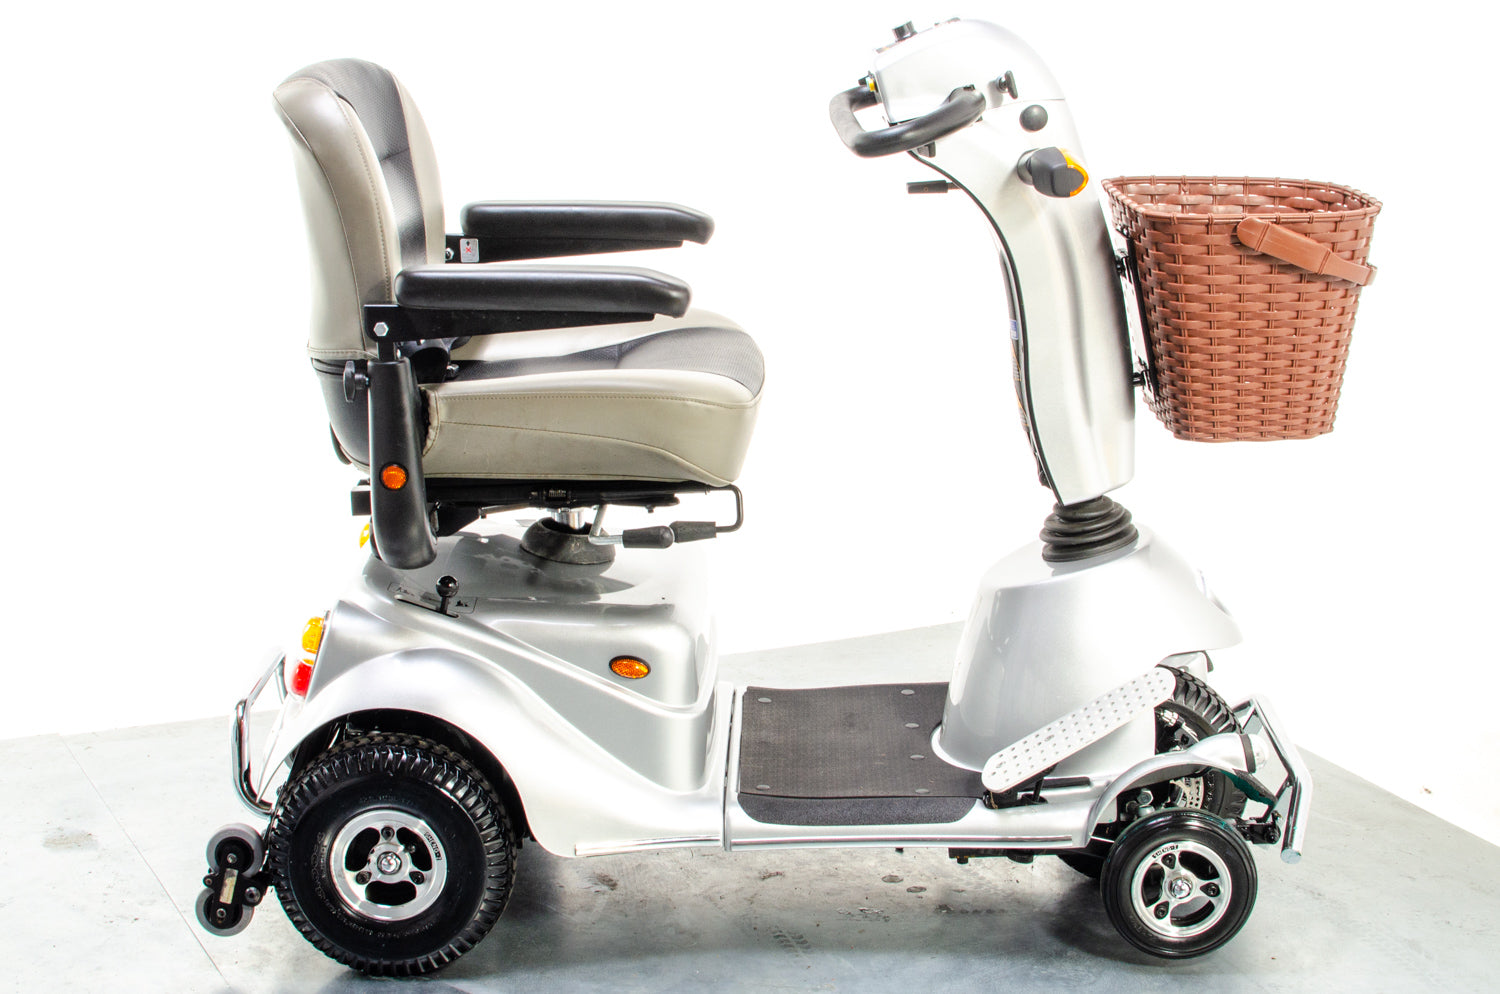 AVC Quingo Classic Used Mobility Scooter 5 Wheels Pavement Turning Circle Suspension